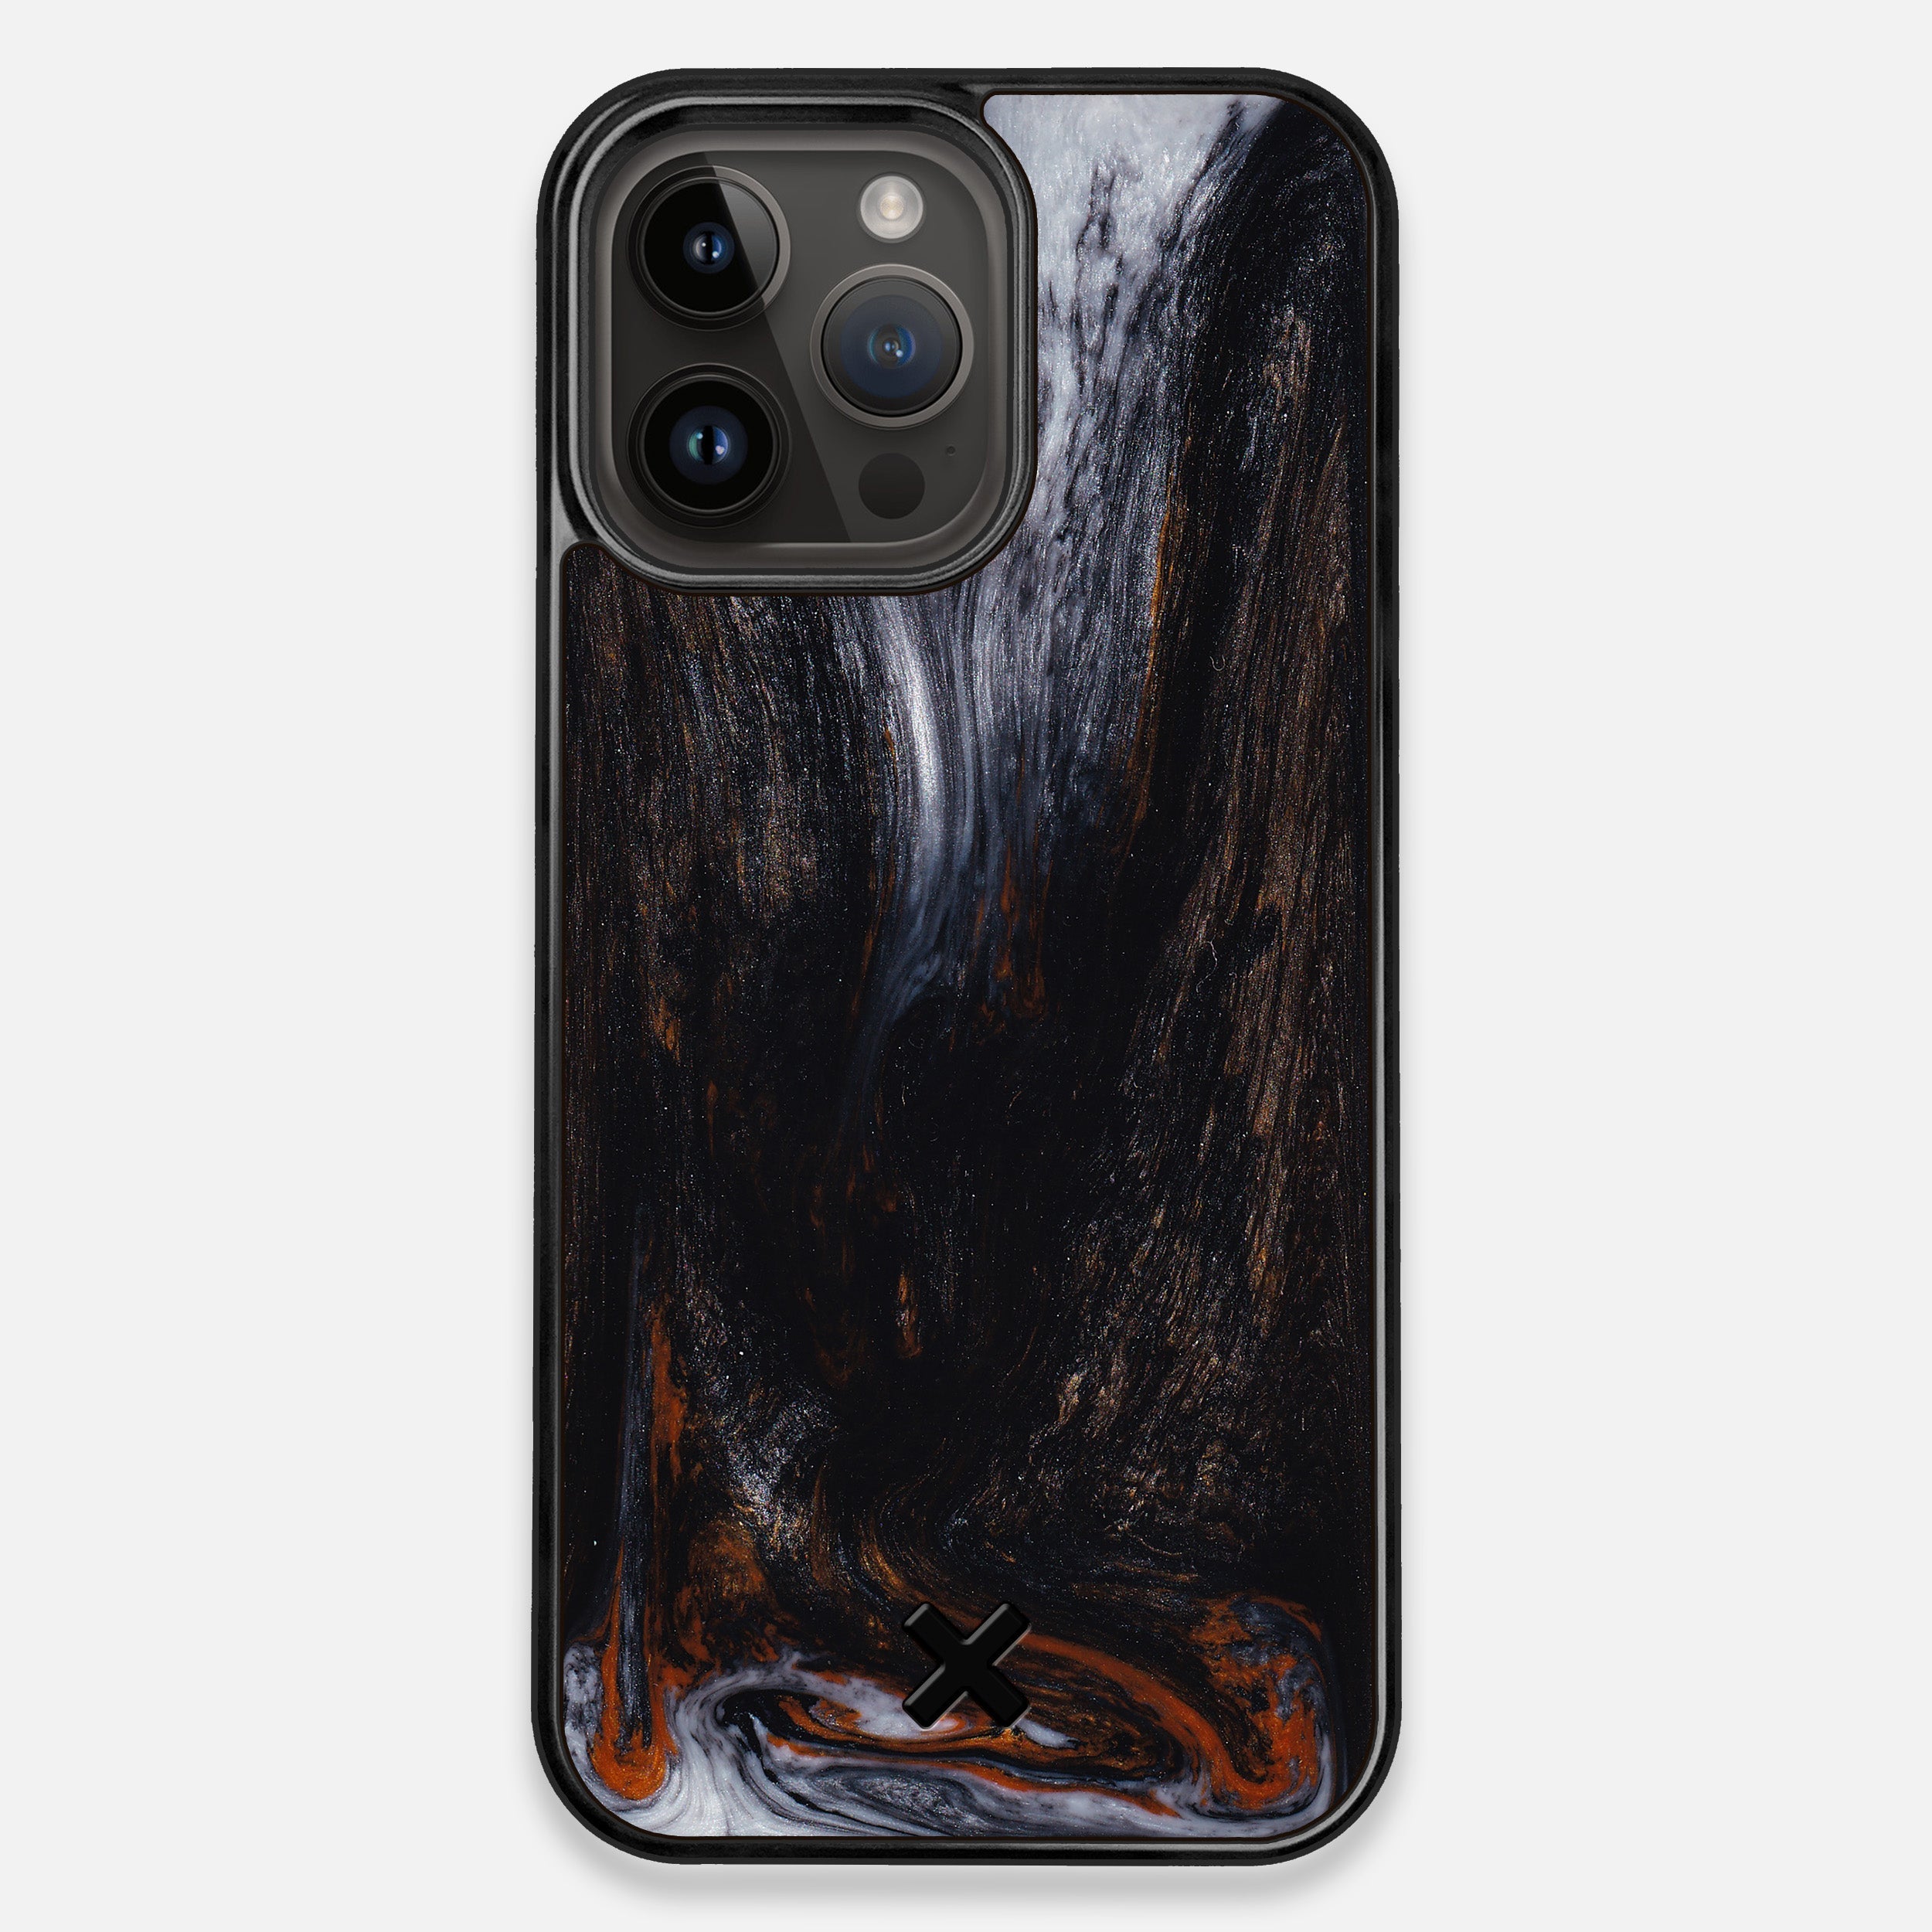 One & Only - Wood and Resin Case - #01736